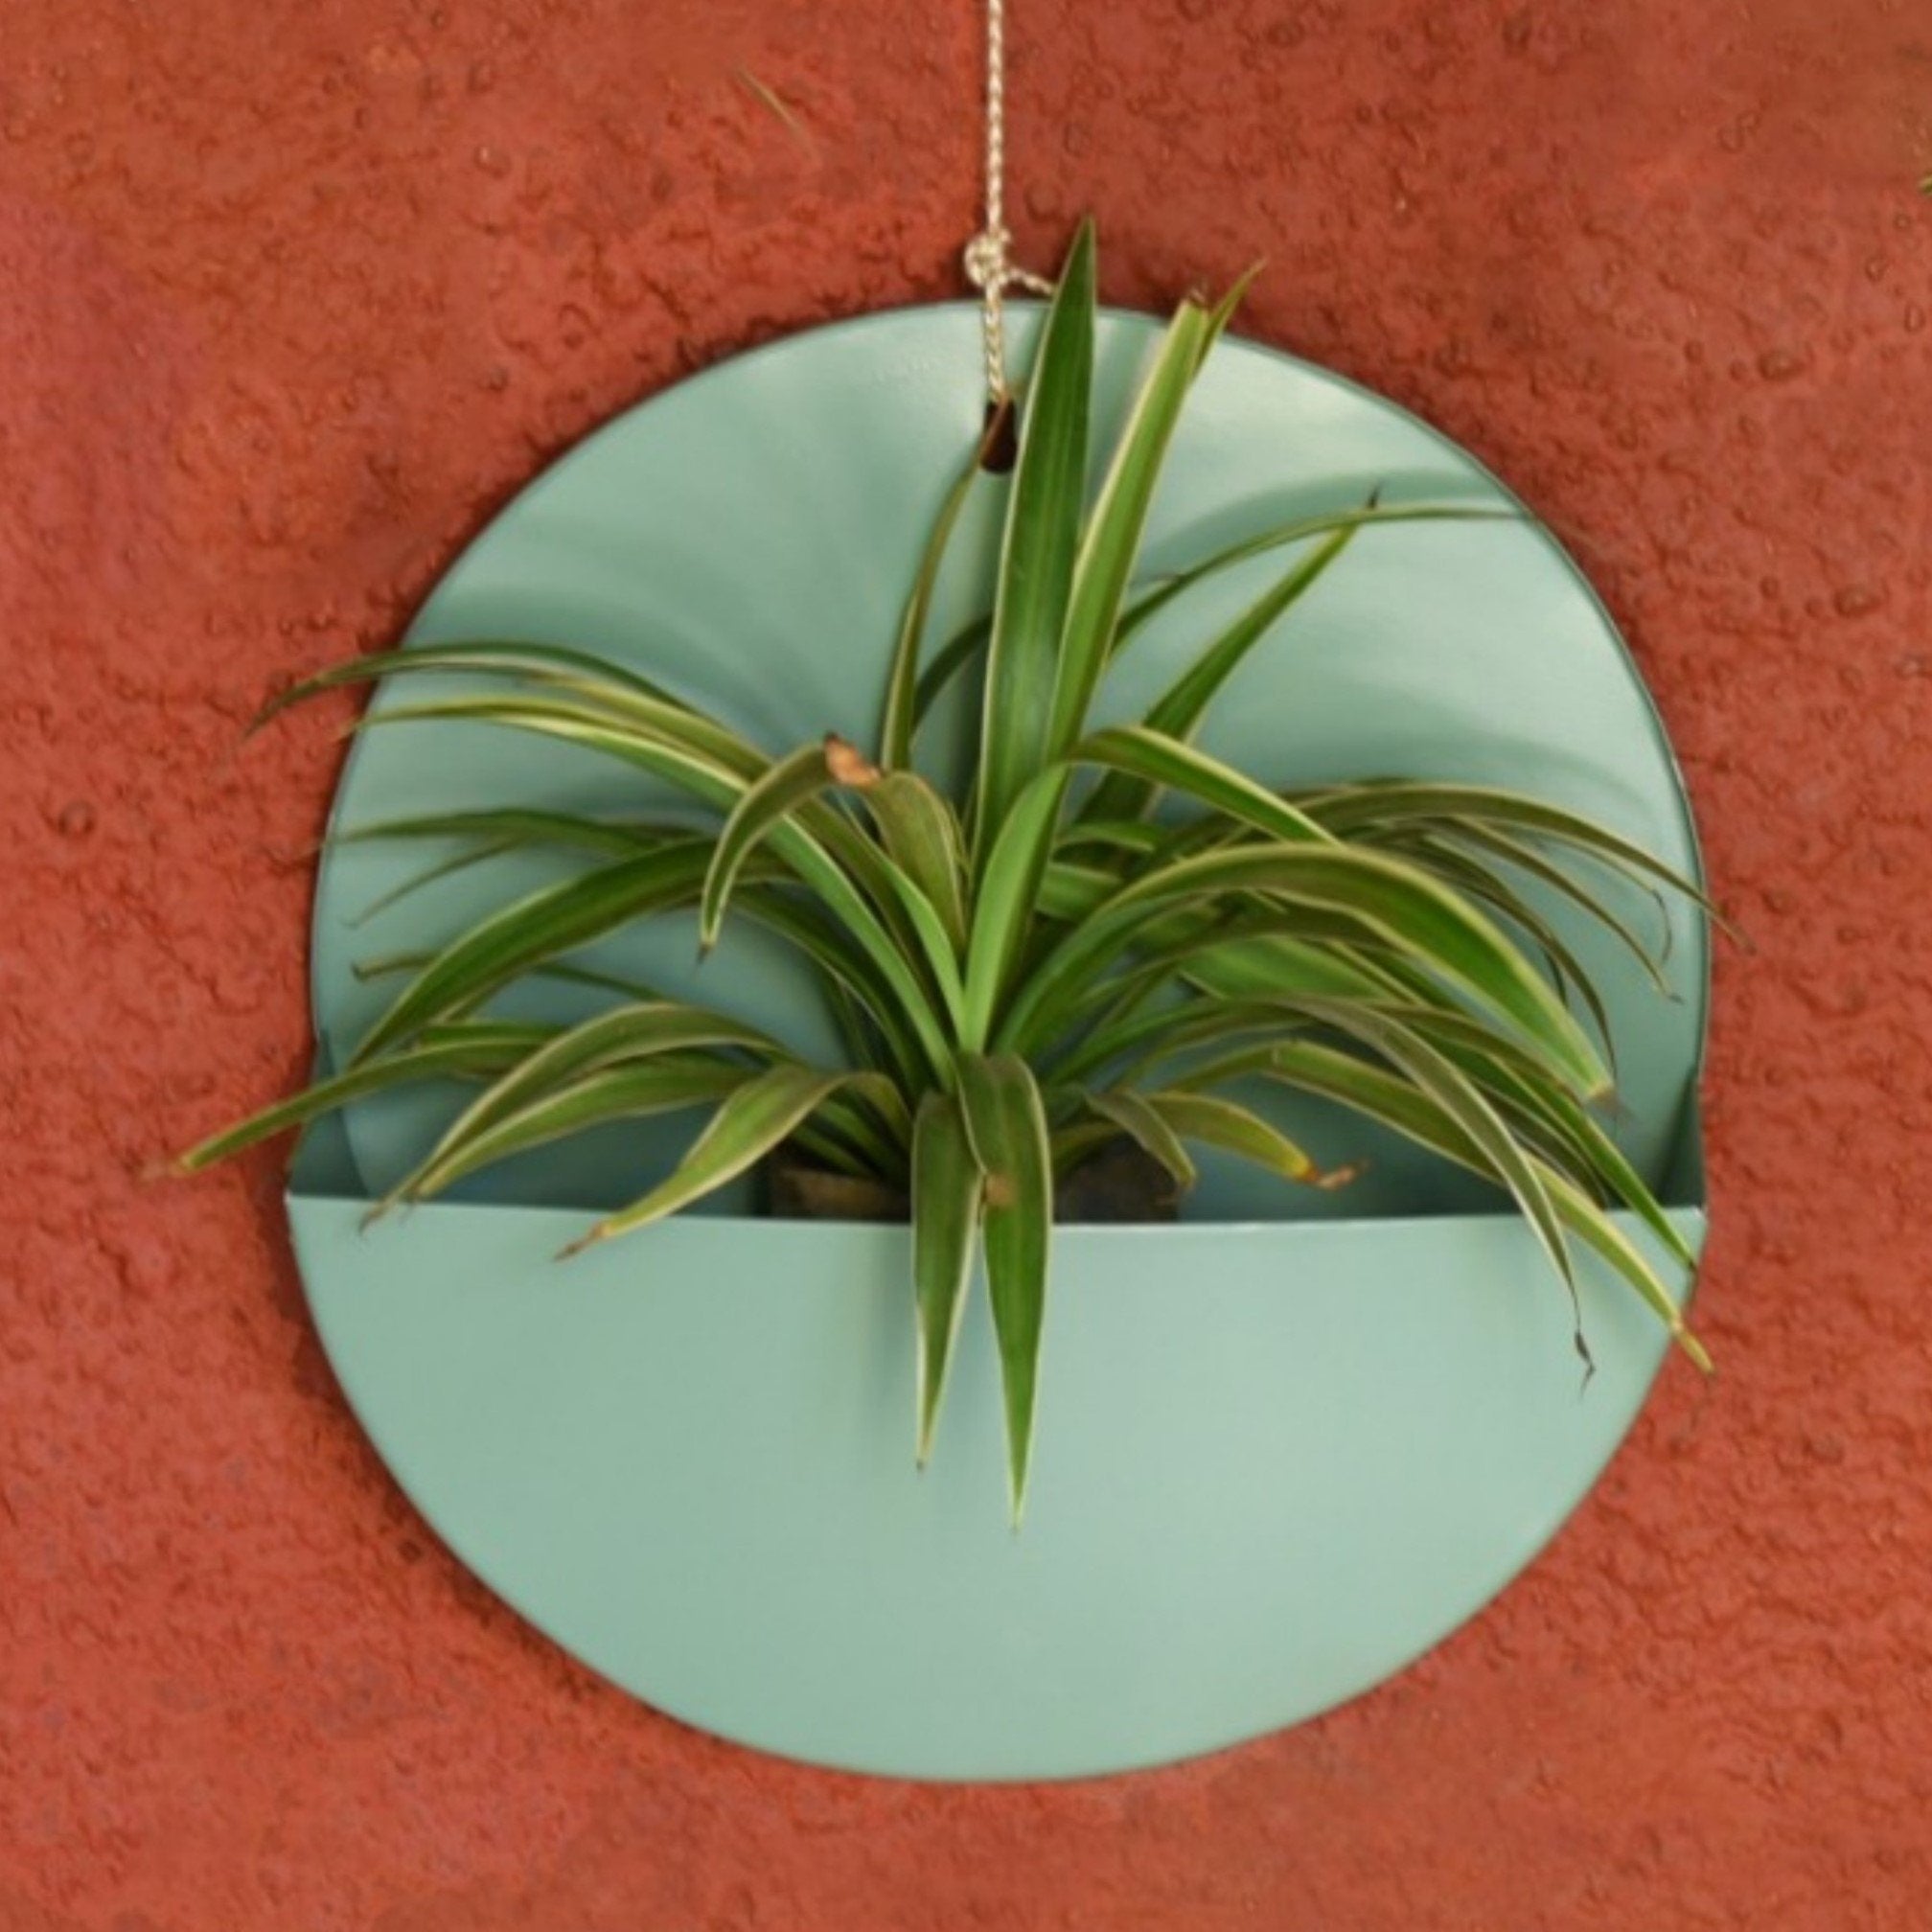 "Lunar" Hanging Metal Mounted Wall Planter / Letter Box in Fern Green 1 BHK Interiors